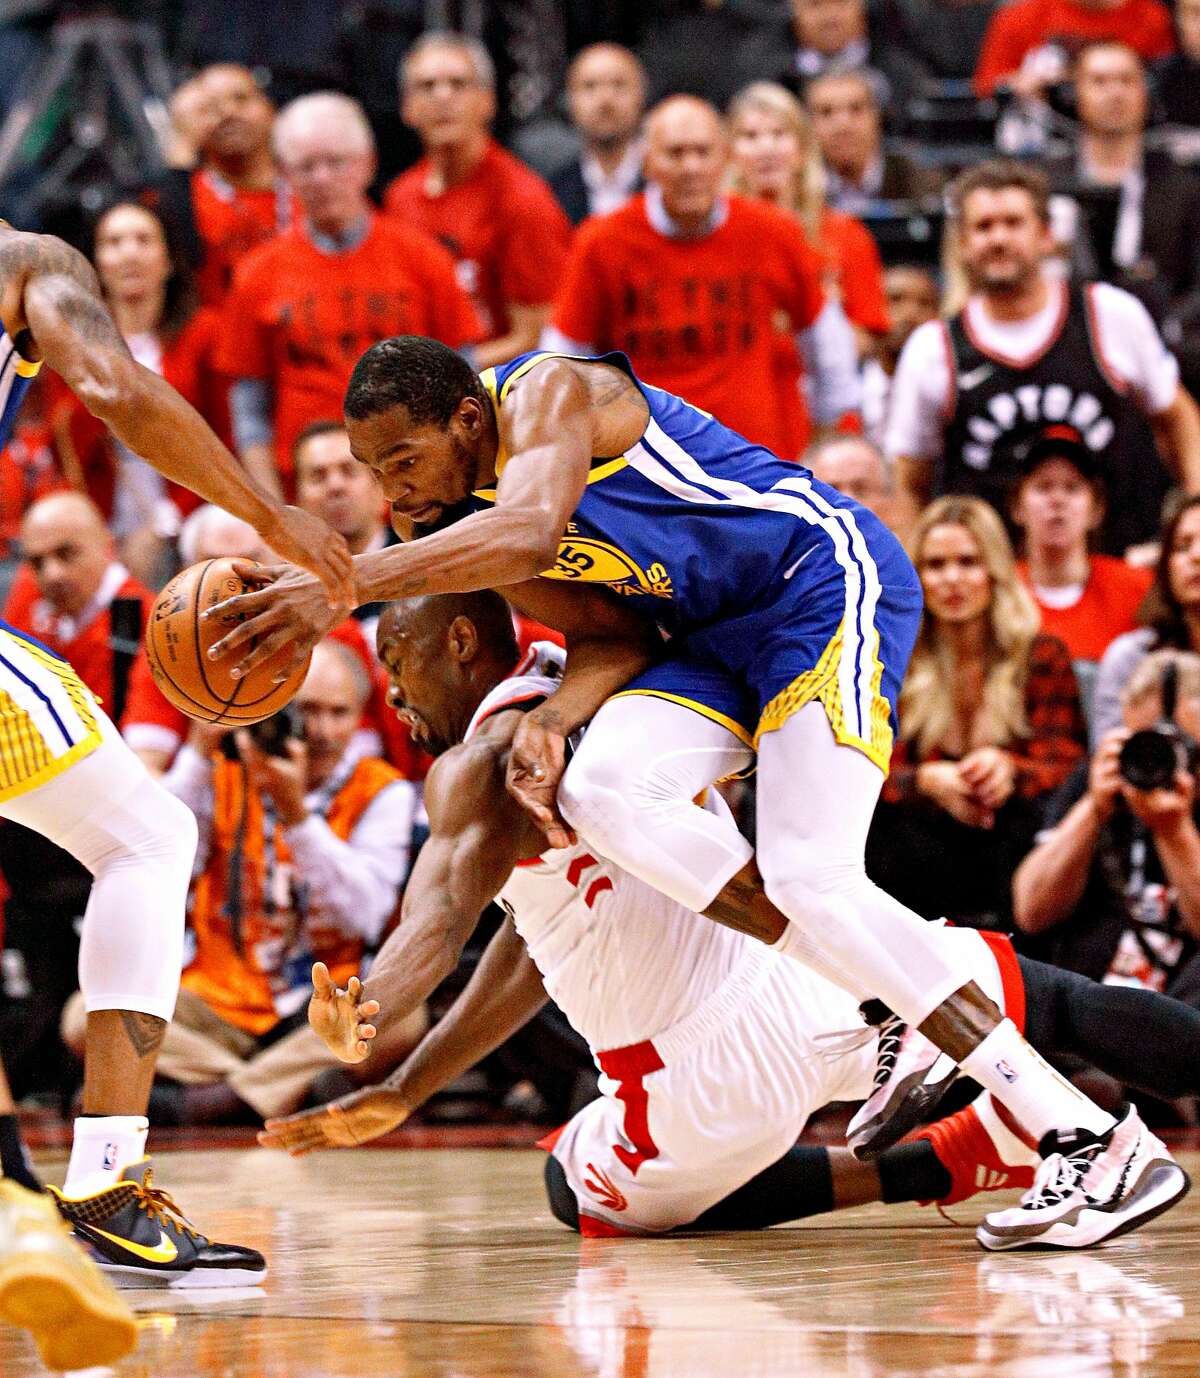 Golden State Warriors� Kevin Durant gets tripped up on Toronto Raptors� Serge Ibaka in the first quarter during game 5 of the NBA Finals between the Golden State Warriors and the Toronto Raptors at Scotiabank Arena on Monday, June 10, 2019 in Toronto, Ontario, Canada.